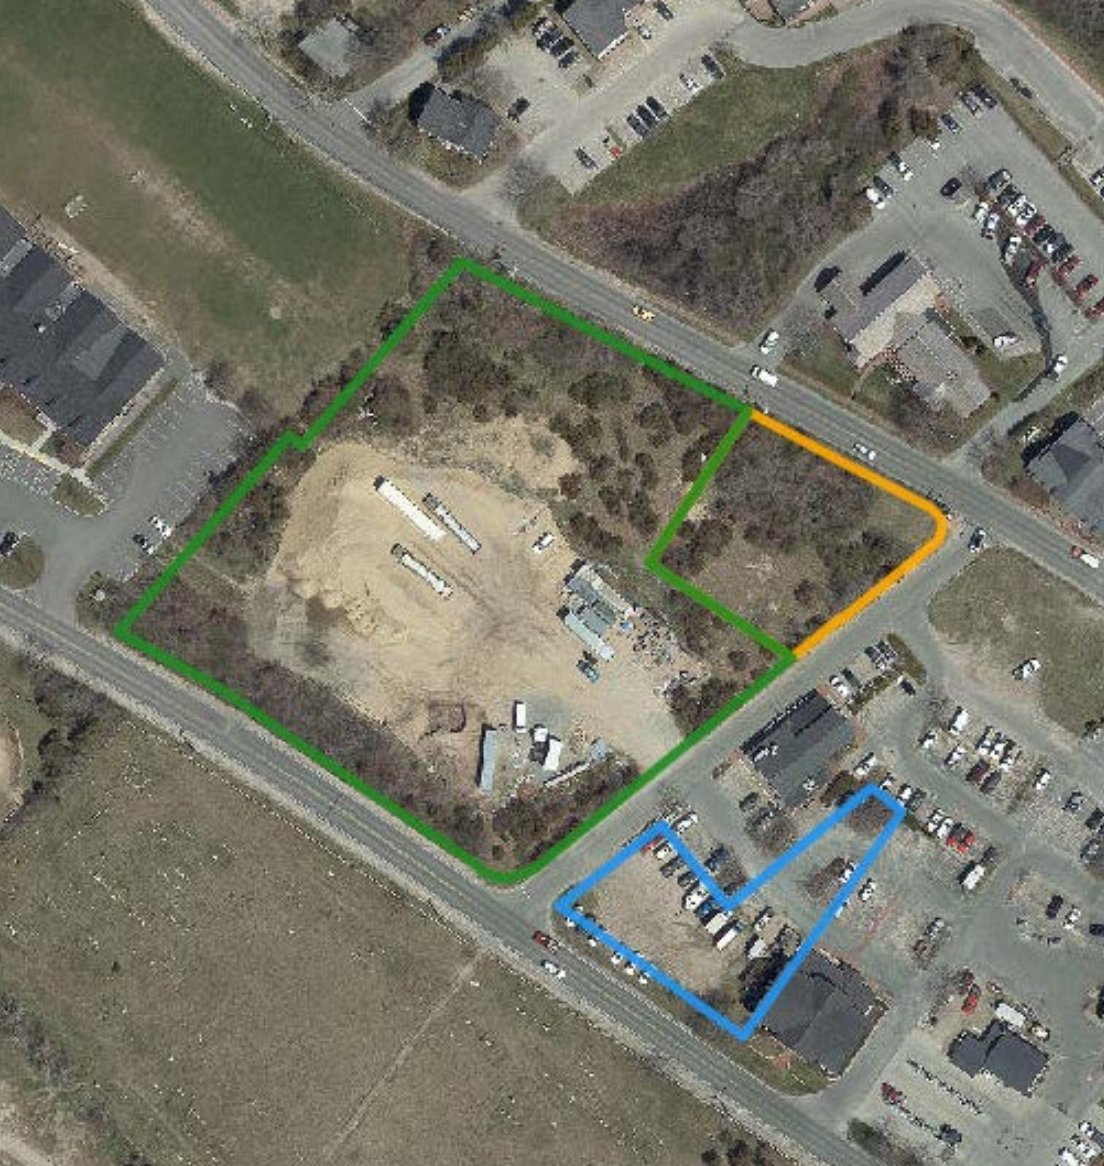 The Planning Board on Monday approved a 12-lot subdivision on just over three acres off Sparks Avenue. Stop & Shop, which leases the bulk of the property, says it has no plans to build the project, but wants to freeze the recently-lowered 40-foot zoning height.